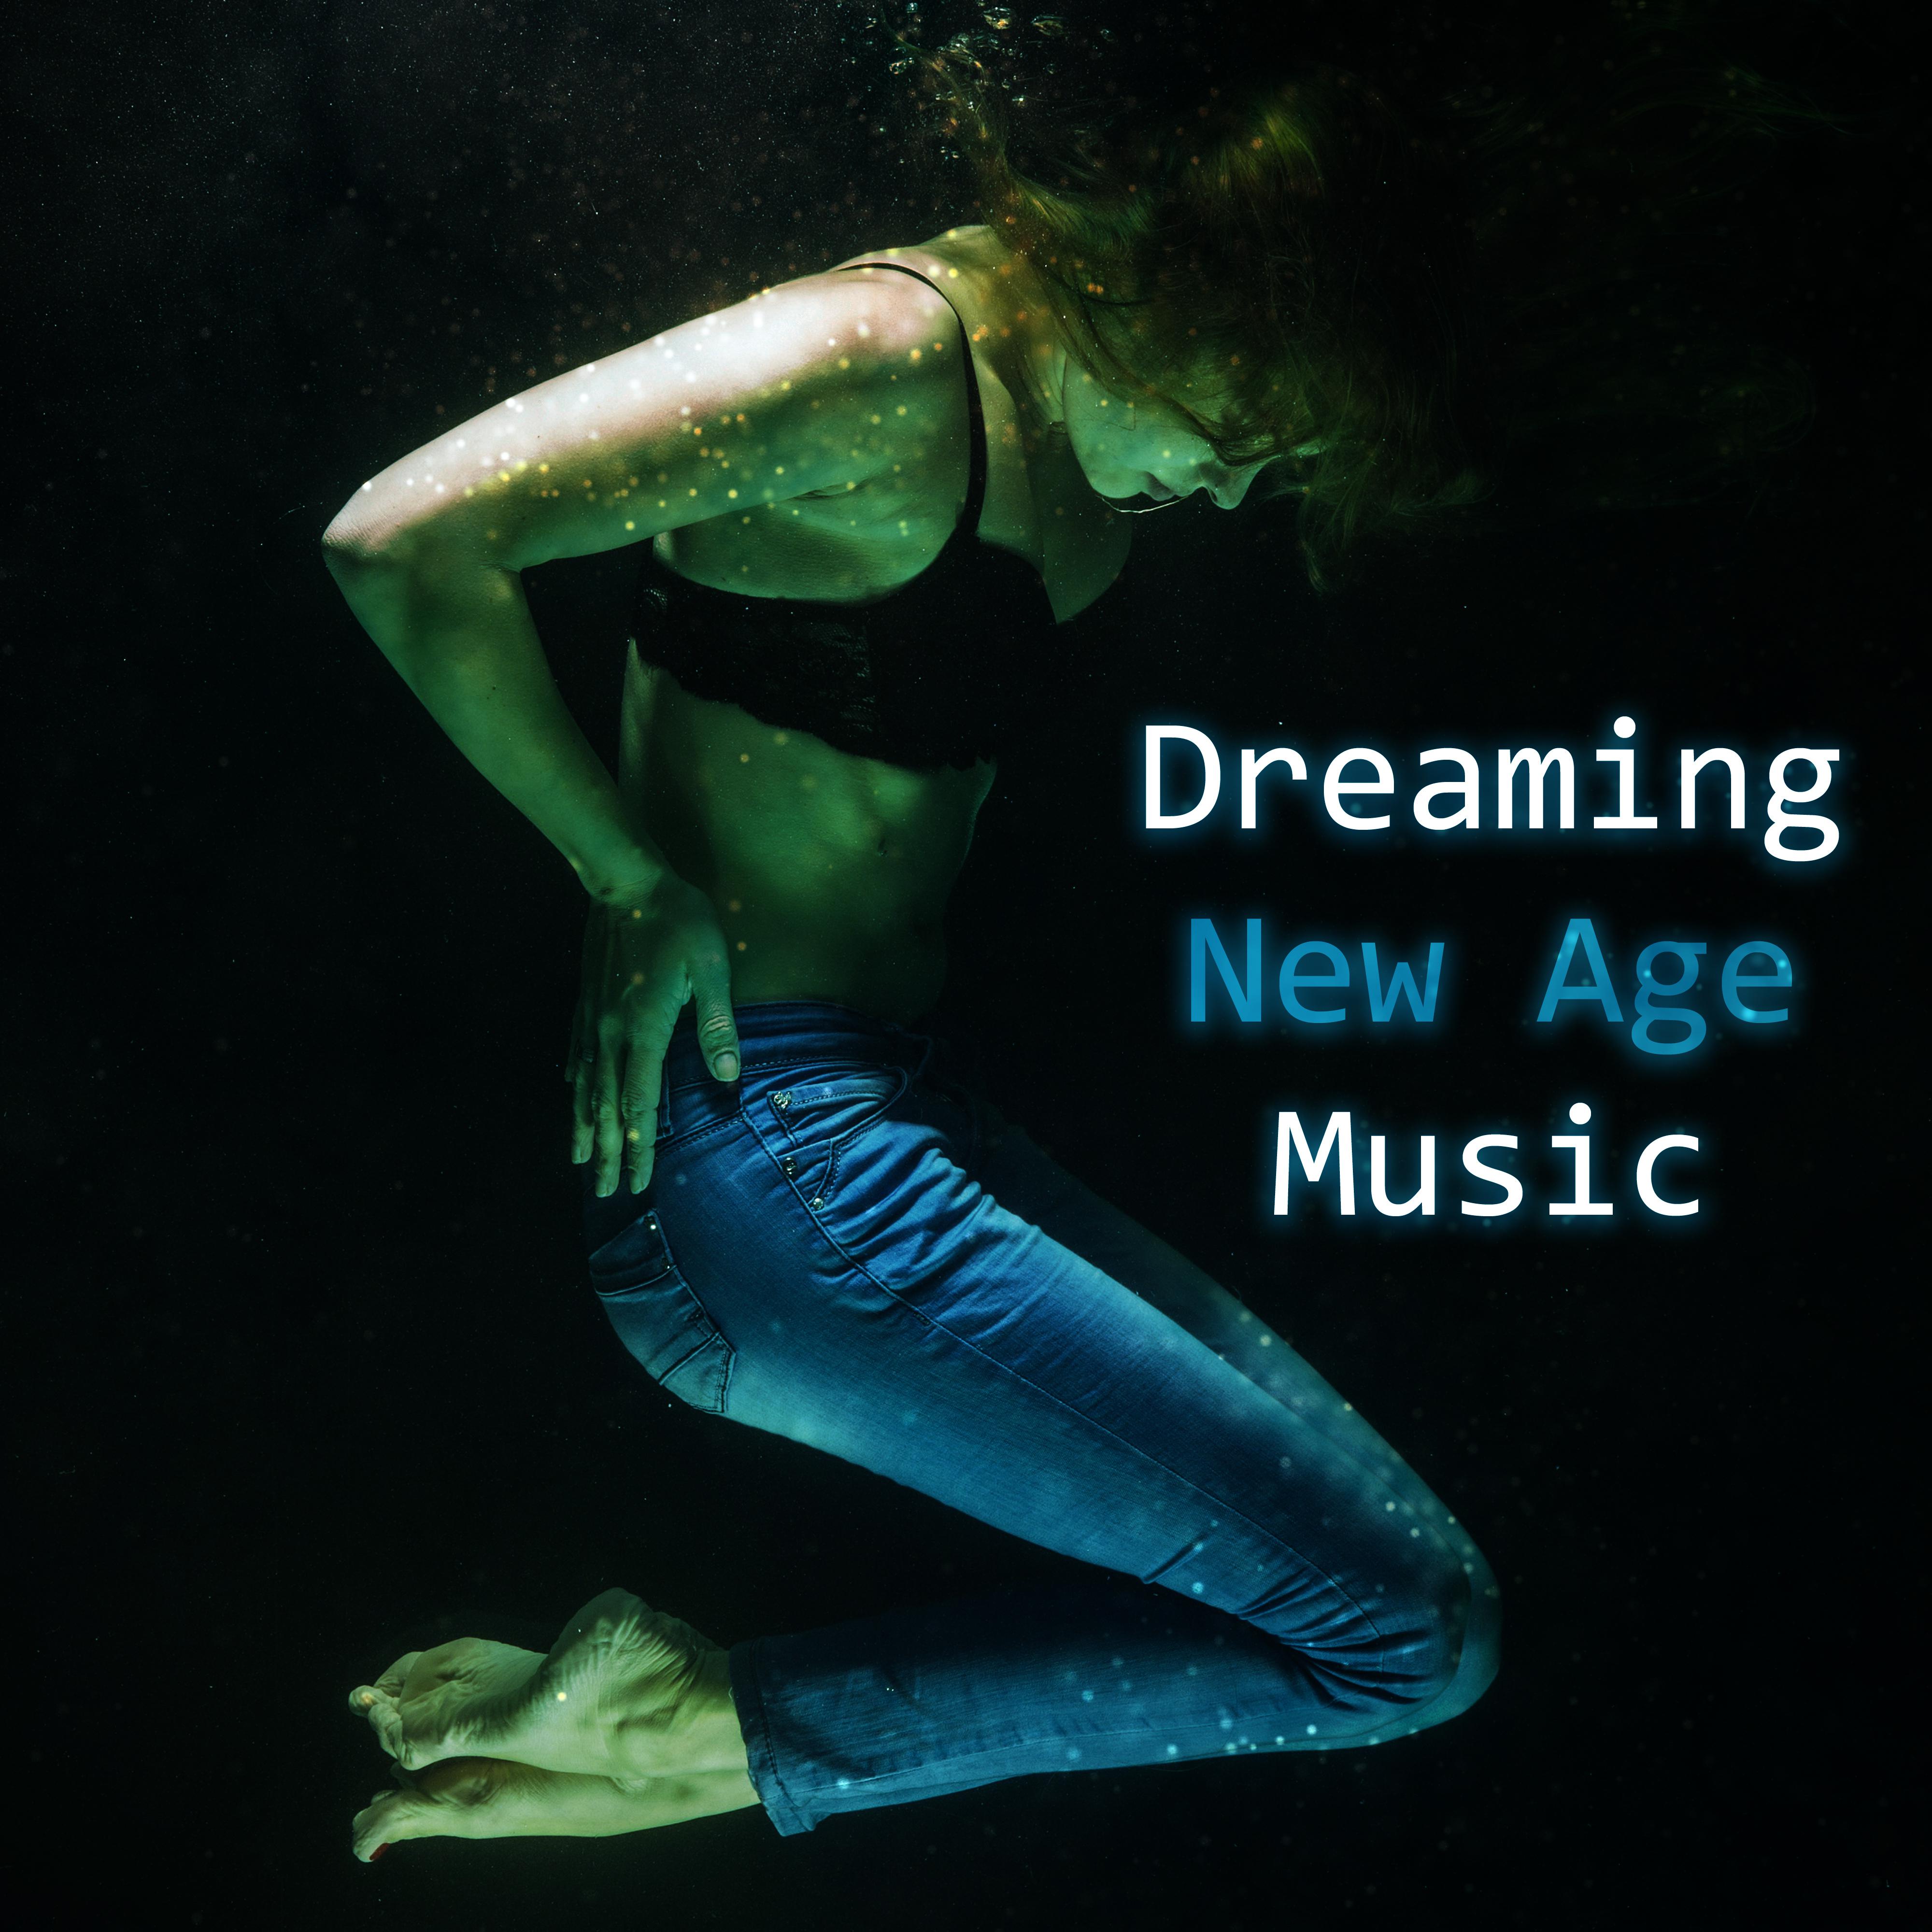 Dreaming New Age Music  Calm Down  Relax, Sleeping Hours, Dream All Night, Stress Relief